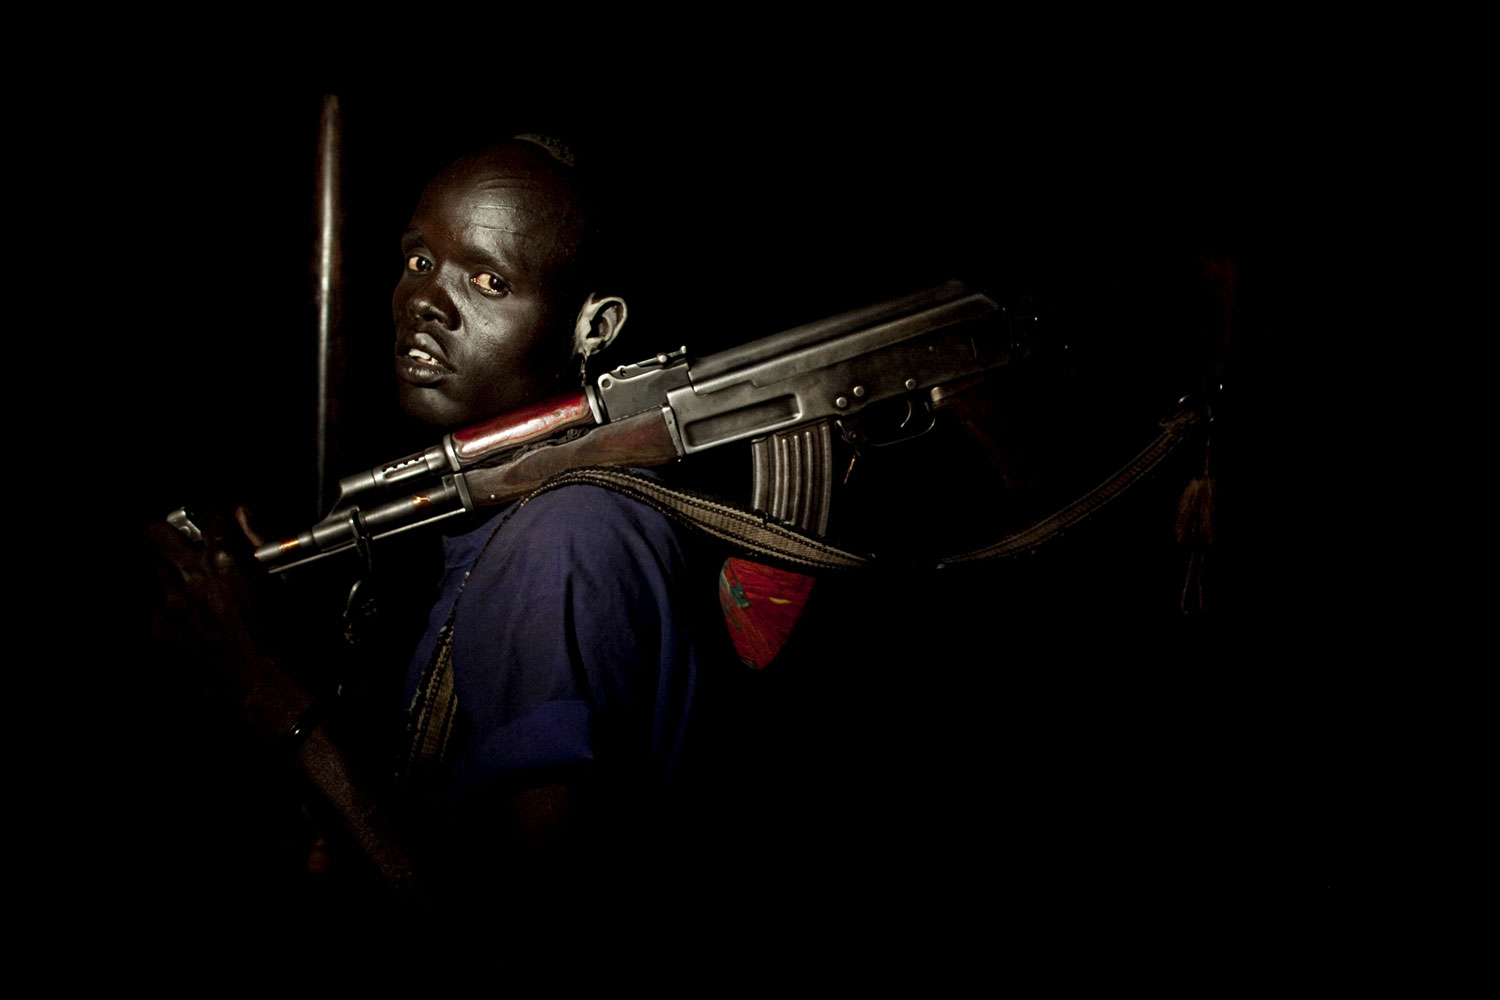 The following six images are from a series Muller shot on young cattle keepers from the Dinka Rek sub-tribe.
                              
                              Portrait #1
                              April 21, 2011. A young cattle keeper from the Dinka Rek sub-tribe poses for a portrait in a remote cattle camp in Wunlit County, southern Sudan. He holds an AK 47 assault rifle, a common weapon among young cattle keeping males. Young men like this man are often tasked with protecting cows from raids by neighboring communities. This image was made at the border between southern Sudan's Lakes and Warrap states where cross-border cattle raiding is extremely common.